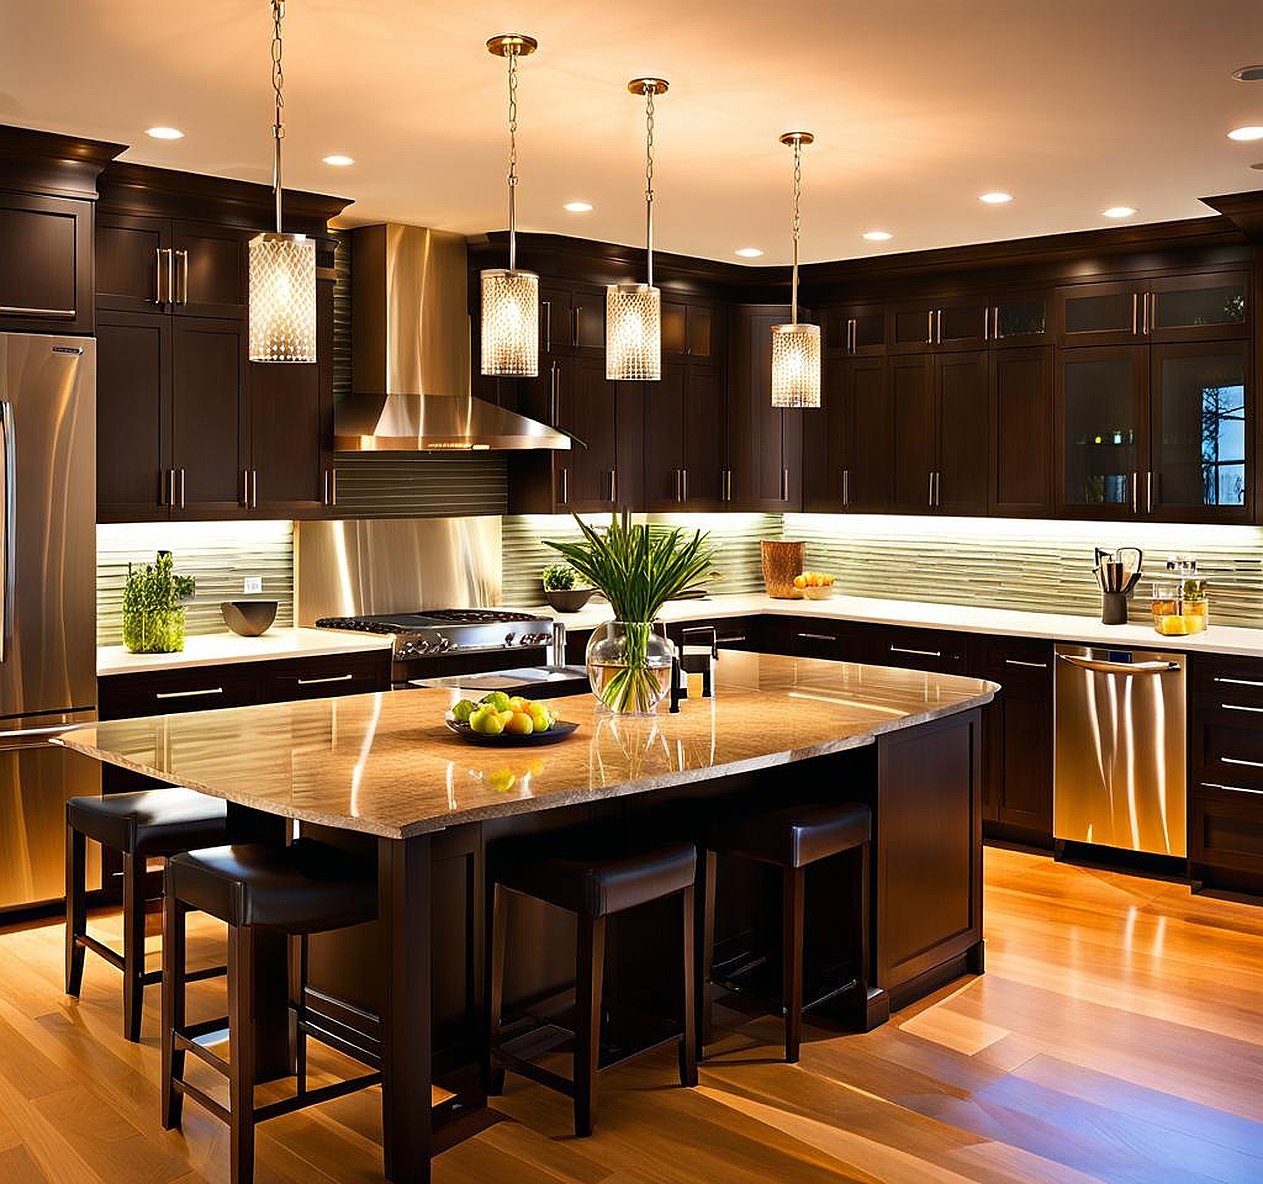 Kitchen Lighting Ideas Without an Island to Consider